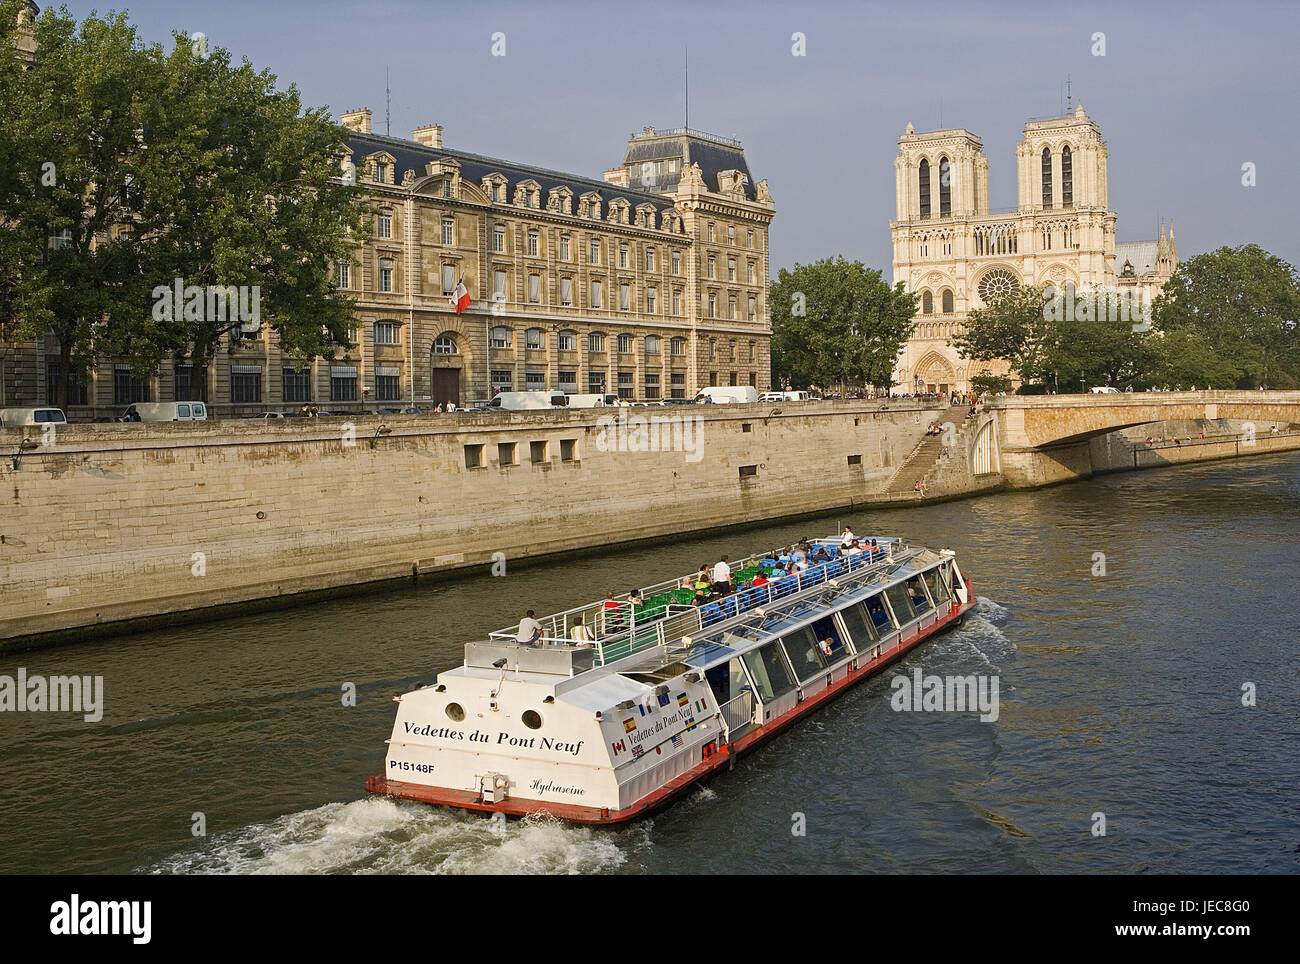 France, Paris, cathedral Notre lady, his, excursion boat, capital, church, structure, Gothic, sacred construction, Notre lady's cathedral, place of interest, landmark, river, boat, ship, riverboat journey, navigation, tourist, sightseeing, destination, tourism, city travel, Stock Photo